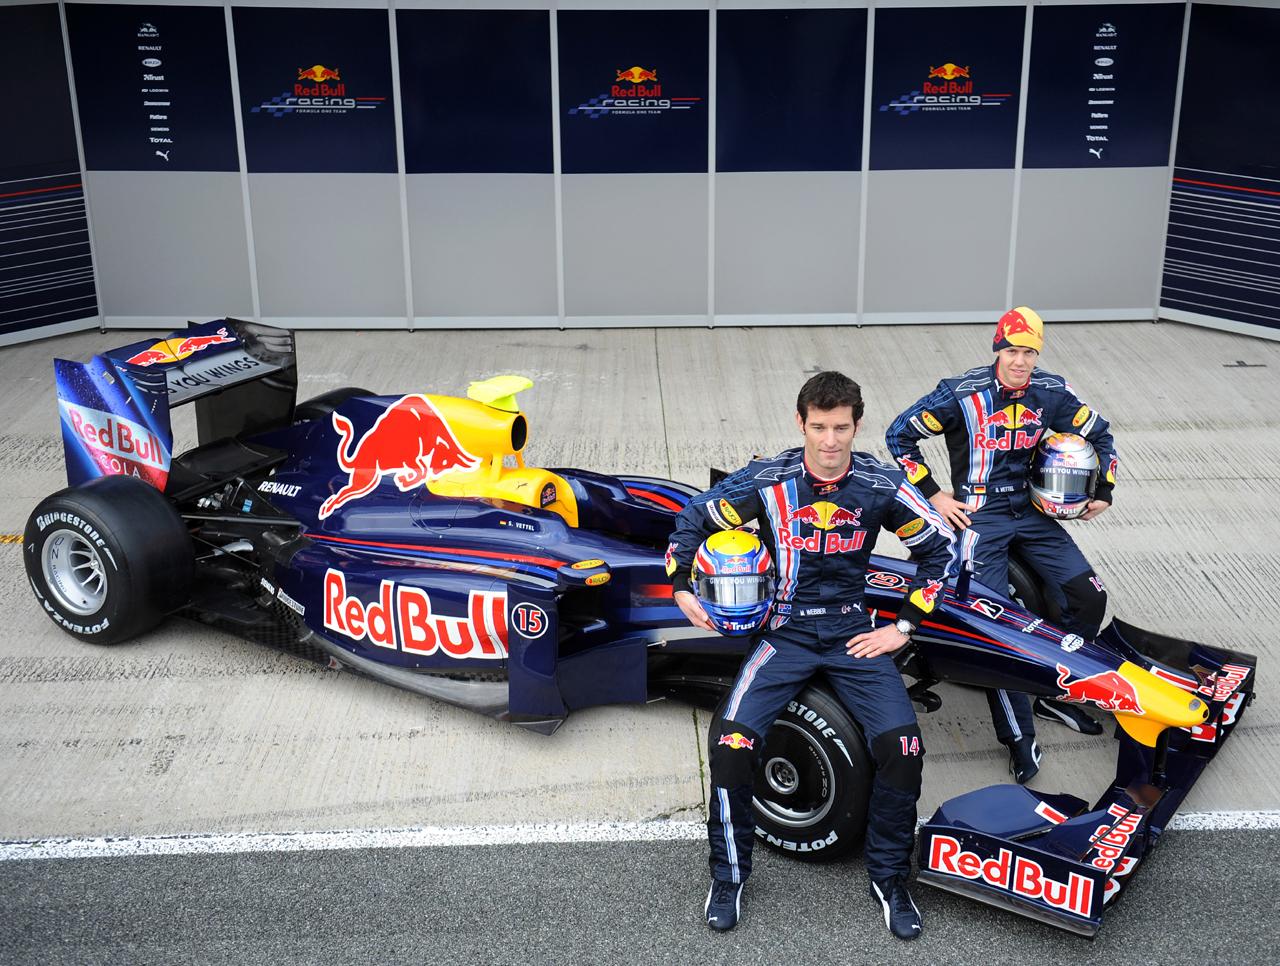 2009 Red Bull News and Research, and Pricing